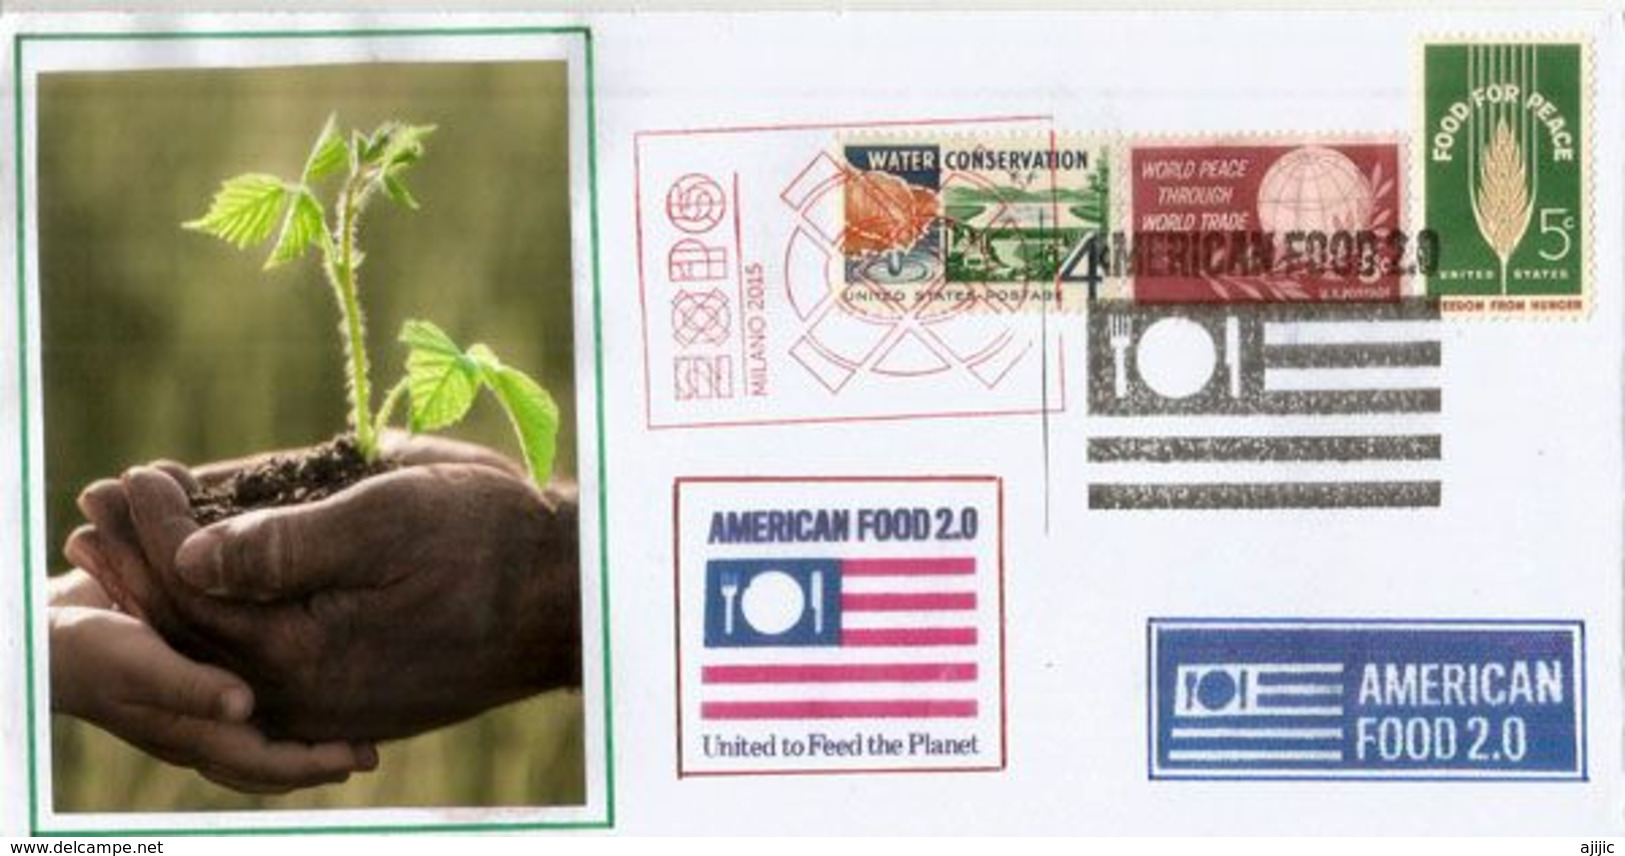 “American Food 2.0” UNIVERSAL EXPO MILANO 2015 "Feeding The Planet",  American Pavilion, With The Official Stamp EXPO - Agriculture